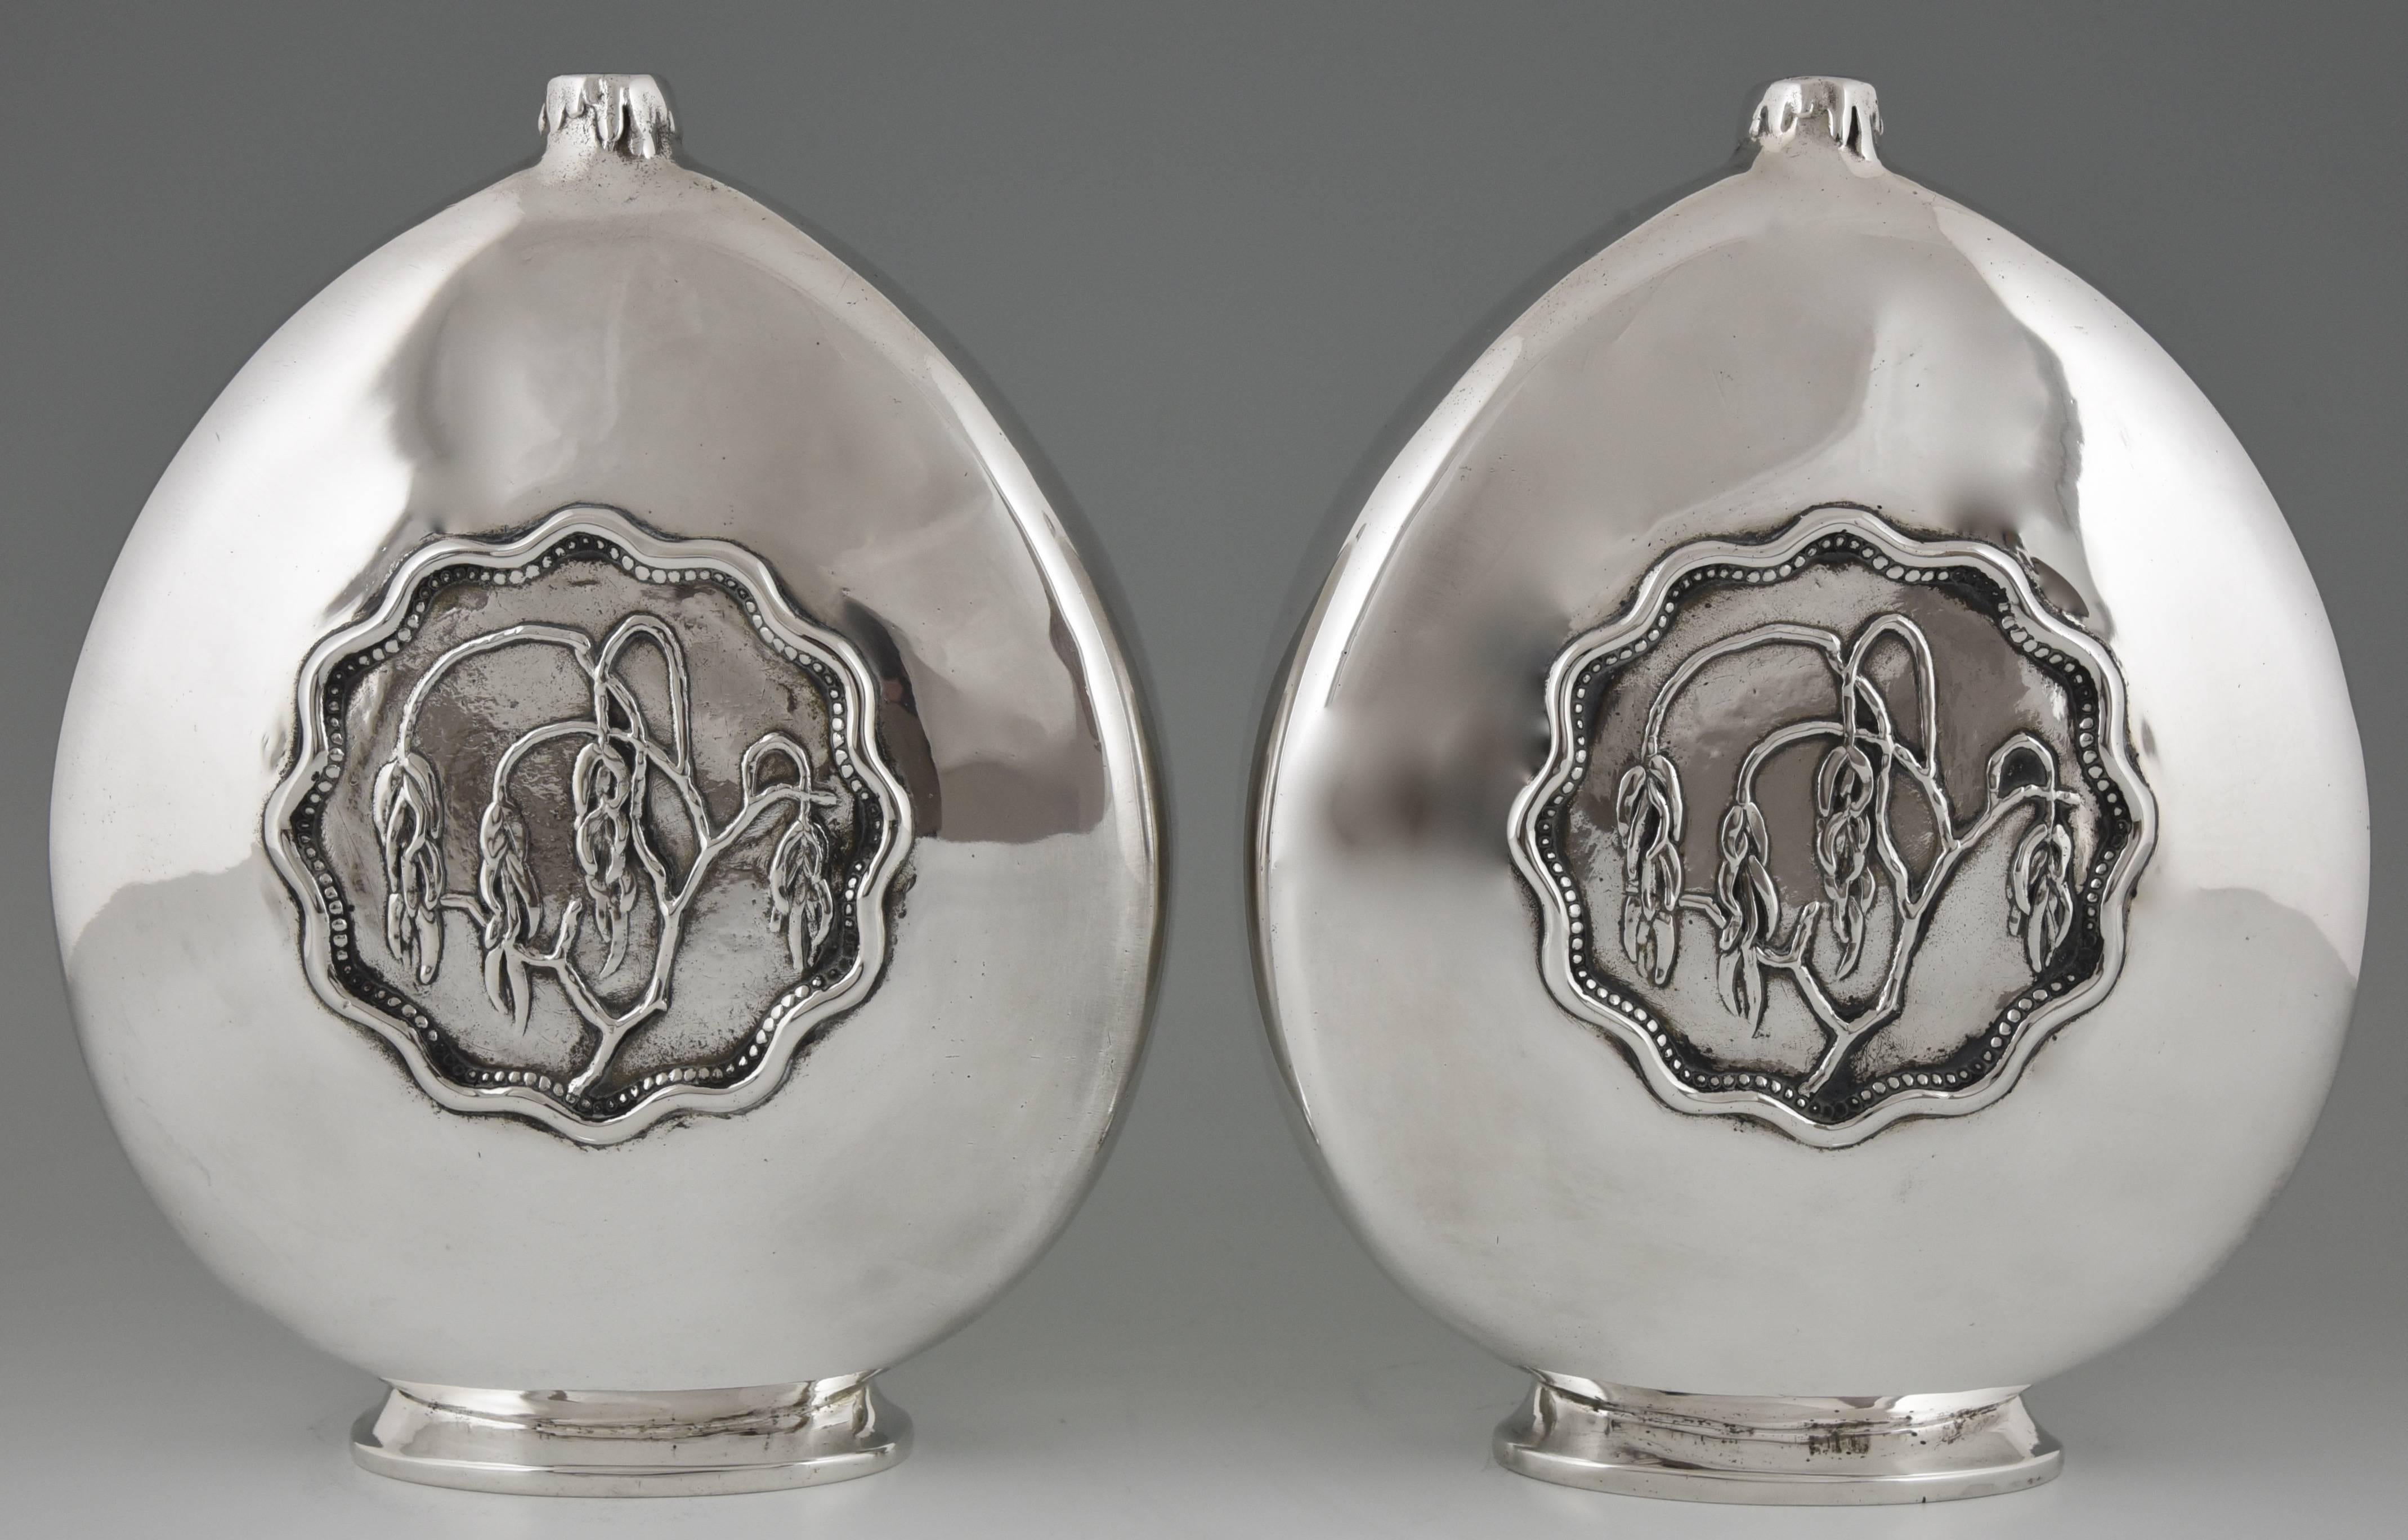 A pair of silvered bronze Art Deco vases with a decoration of branches in relief. By Georges Poitvin. Famous for his car mascots and worked for the Hermes company.  He received several award for his work. 
Signature & Marks:  G. Poitvin.  Stamped